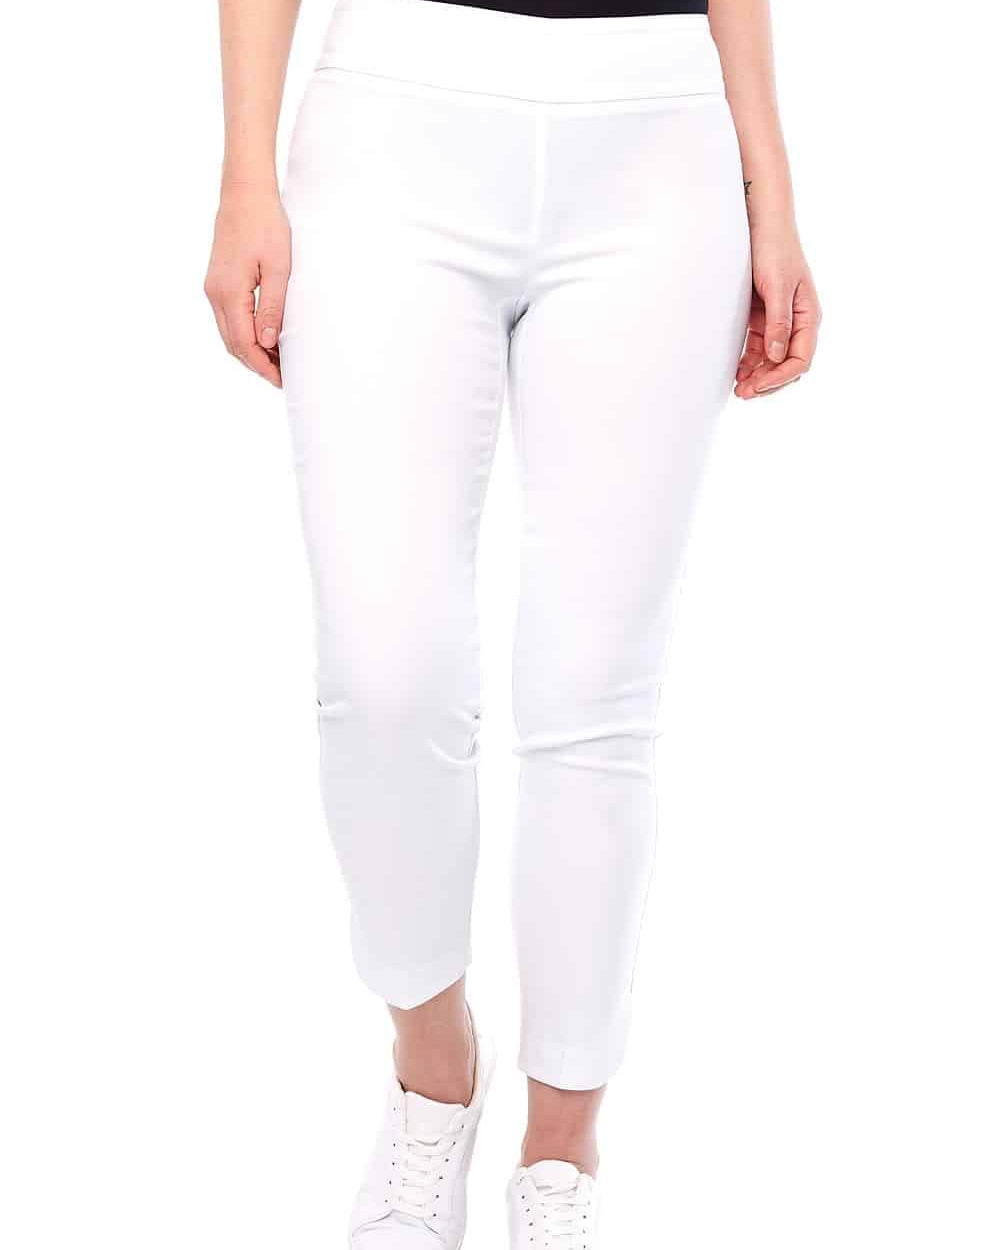 UP! Women's Pants White / 6 Solid Slim Ankle Pant